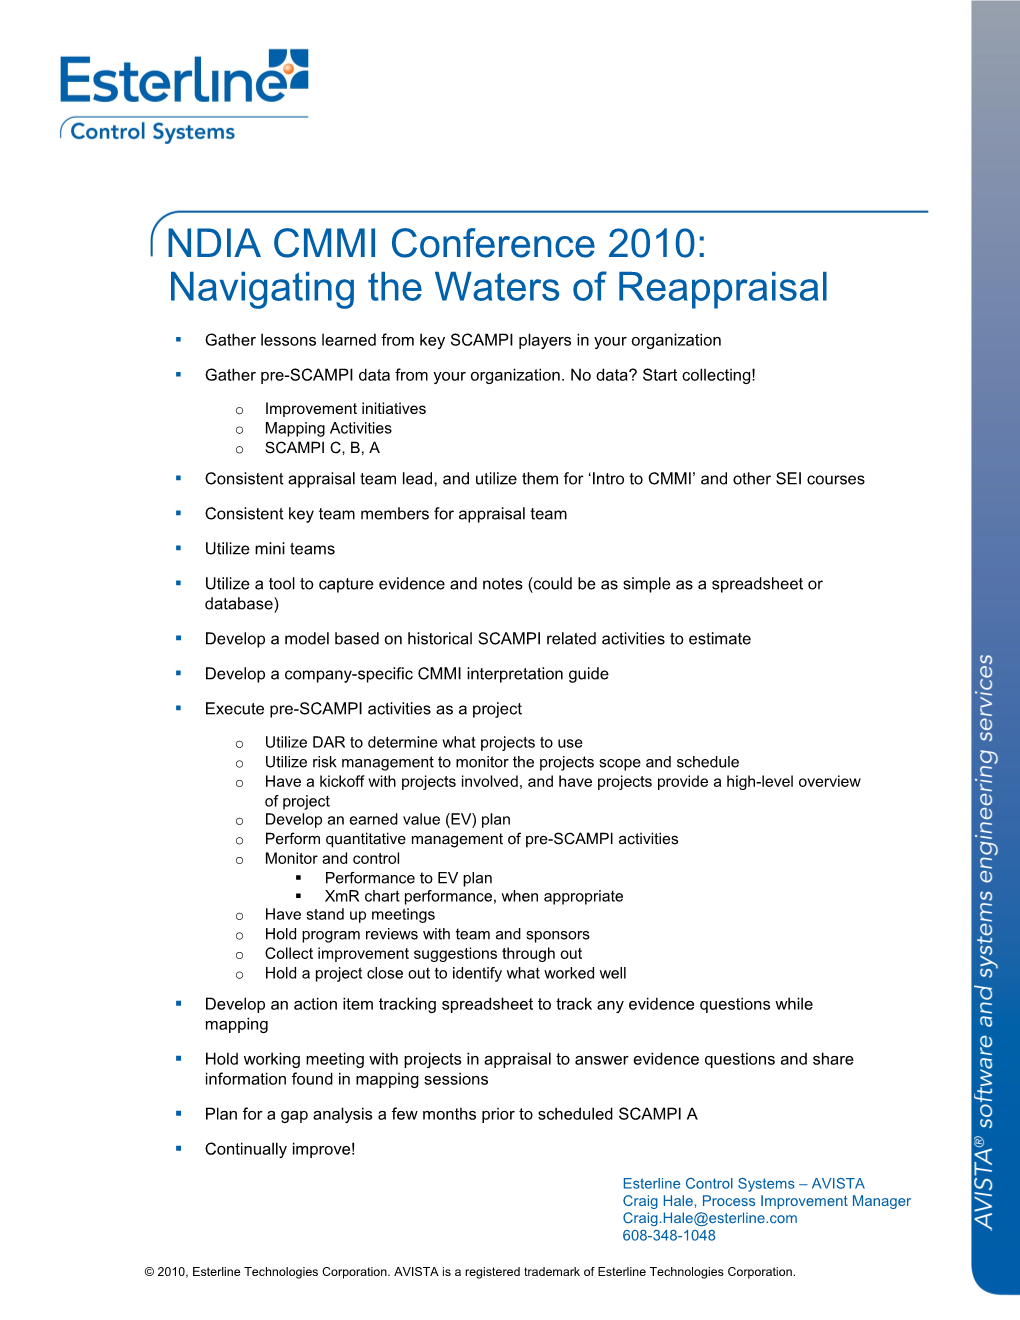 NDIA CMMI Conference 2010: Inavigating the Waters of Reappraisal